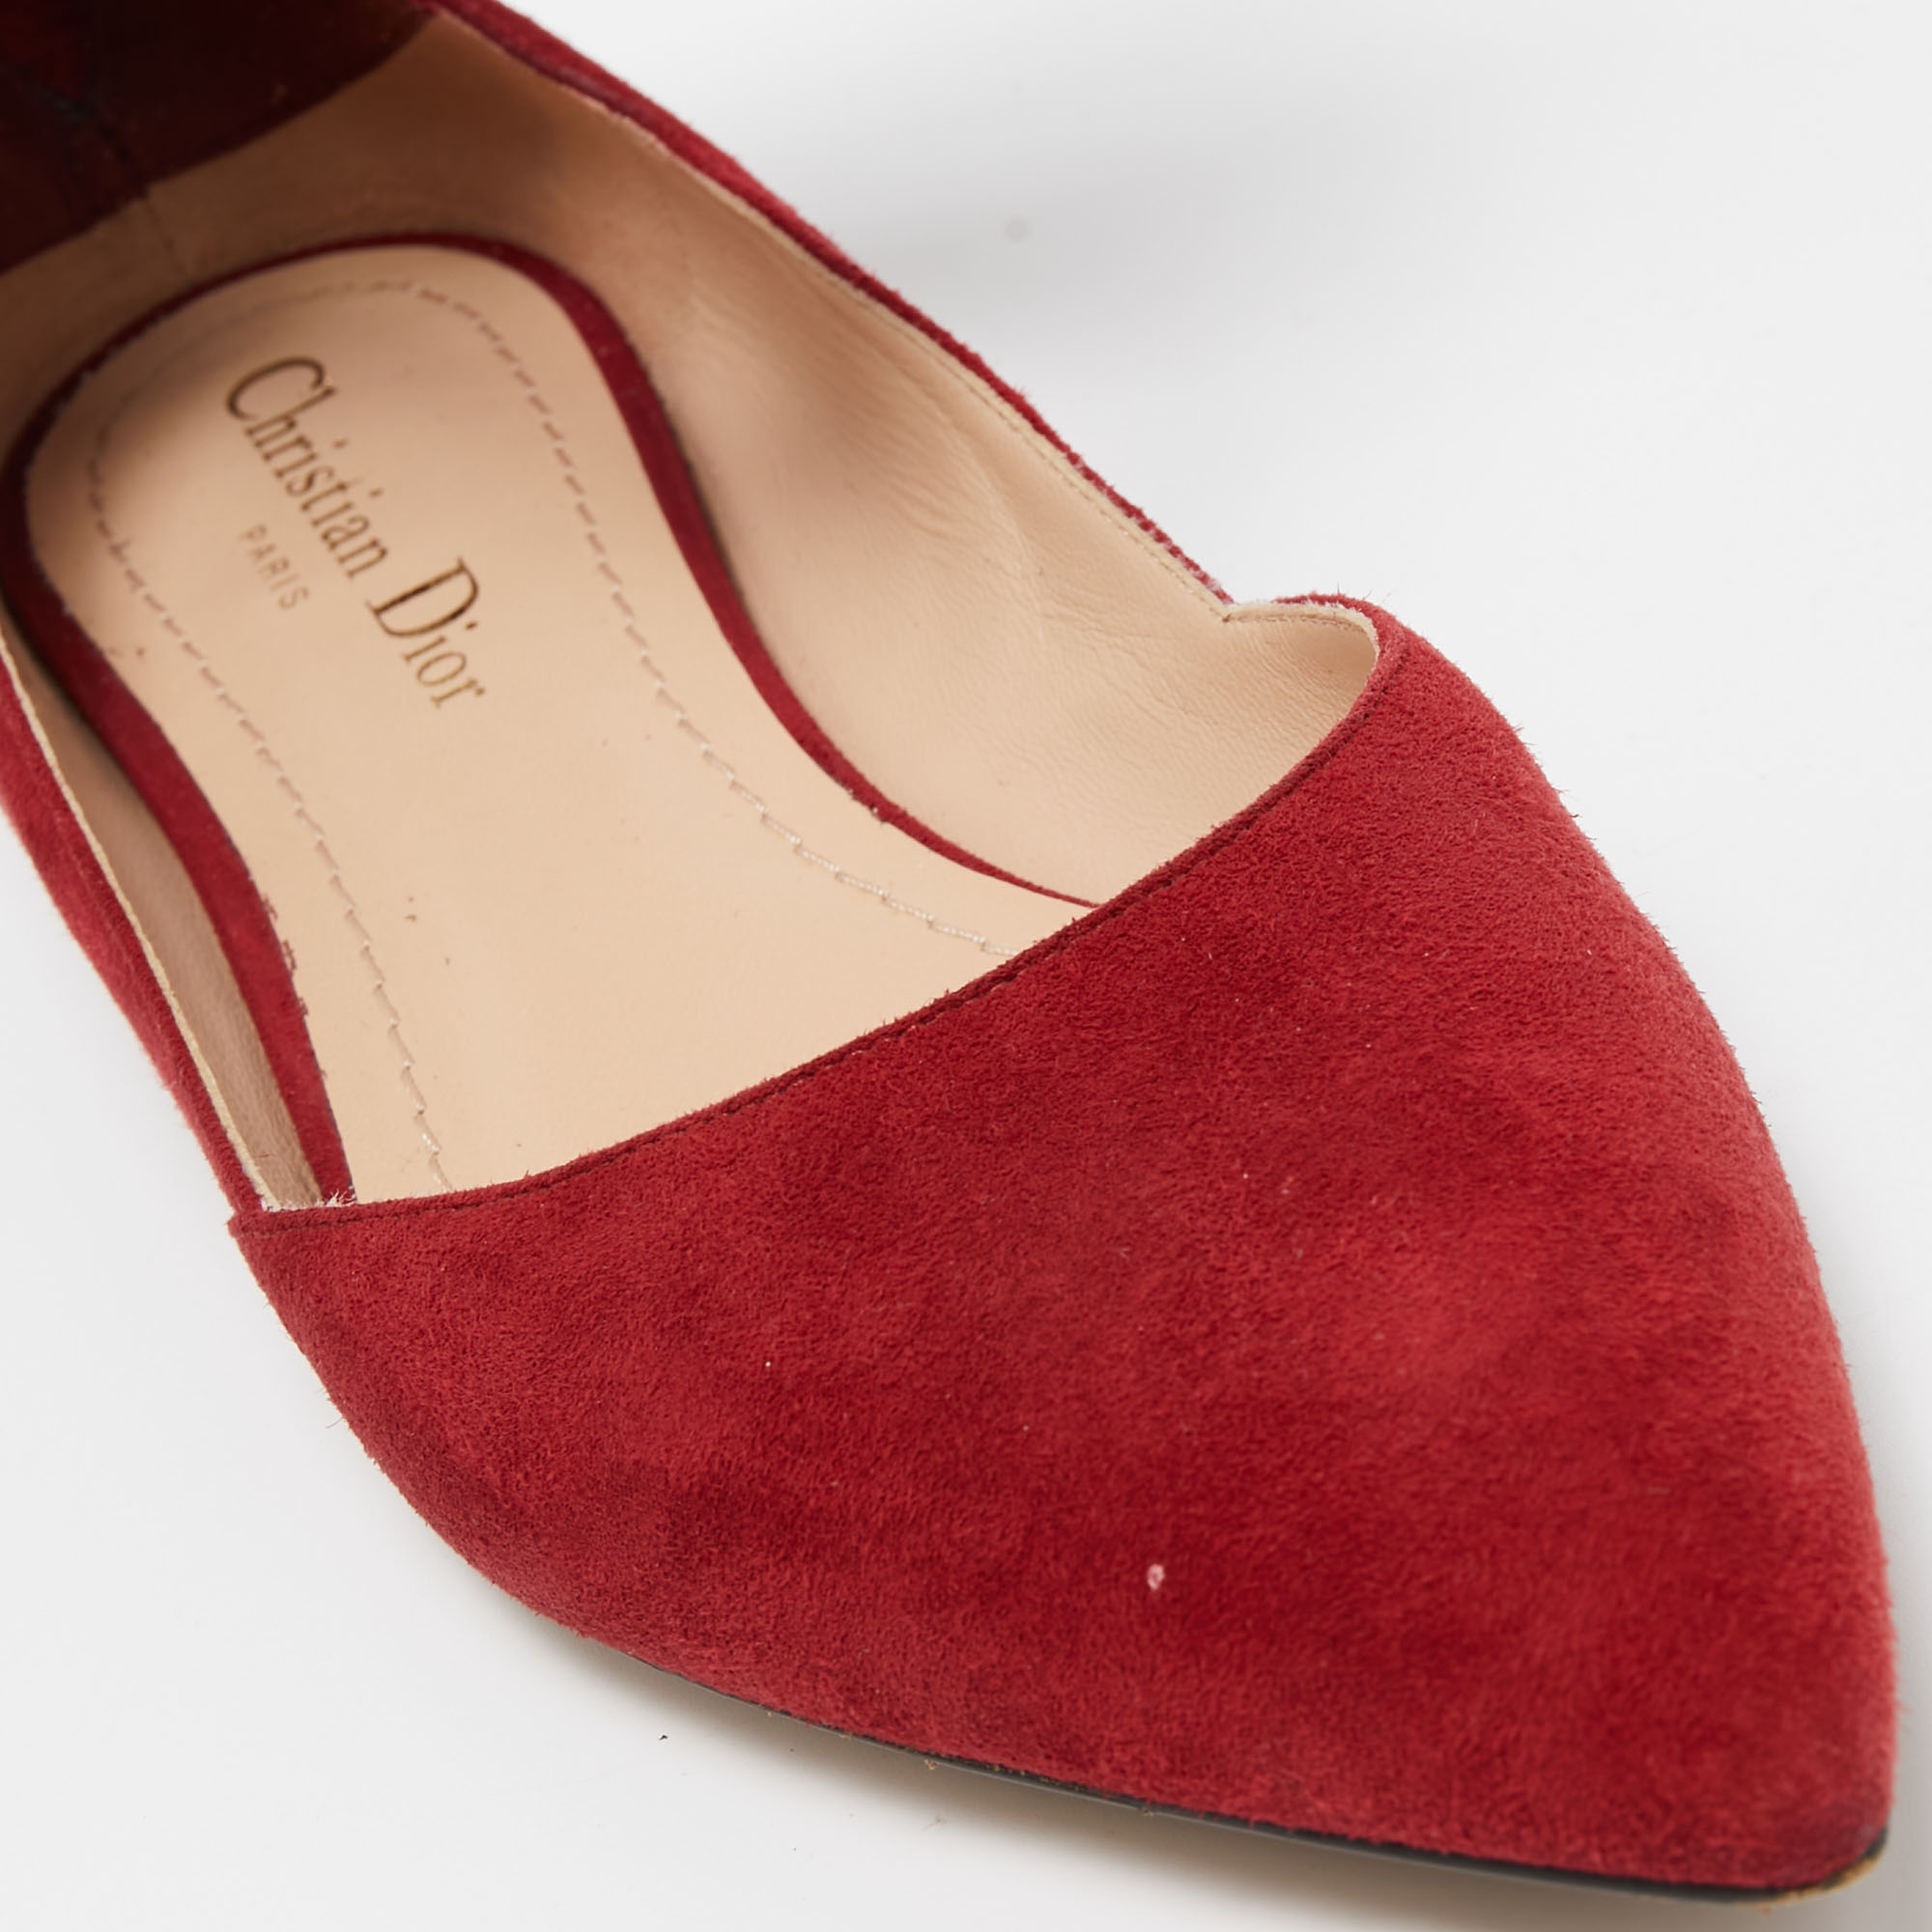 Dior Red Suede Ankle Wrap Ballet Flats Size 38